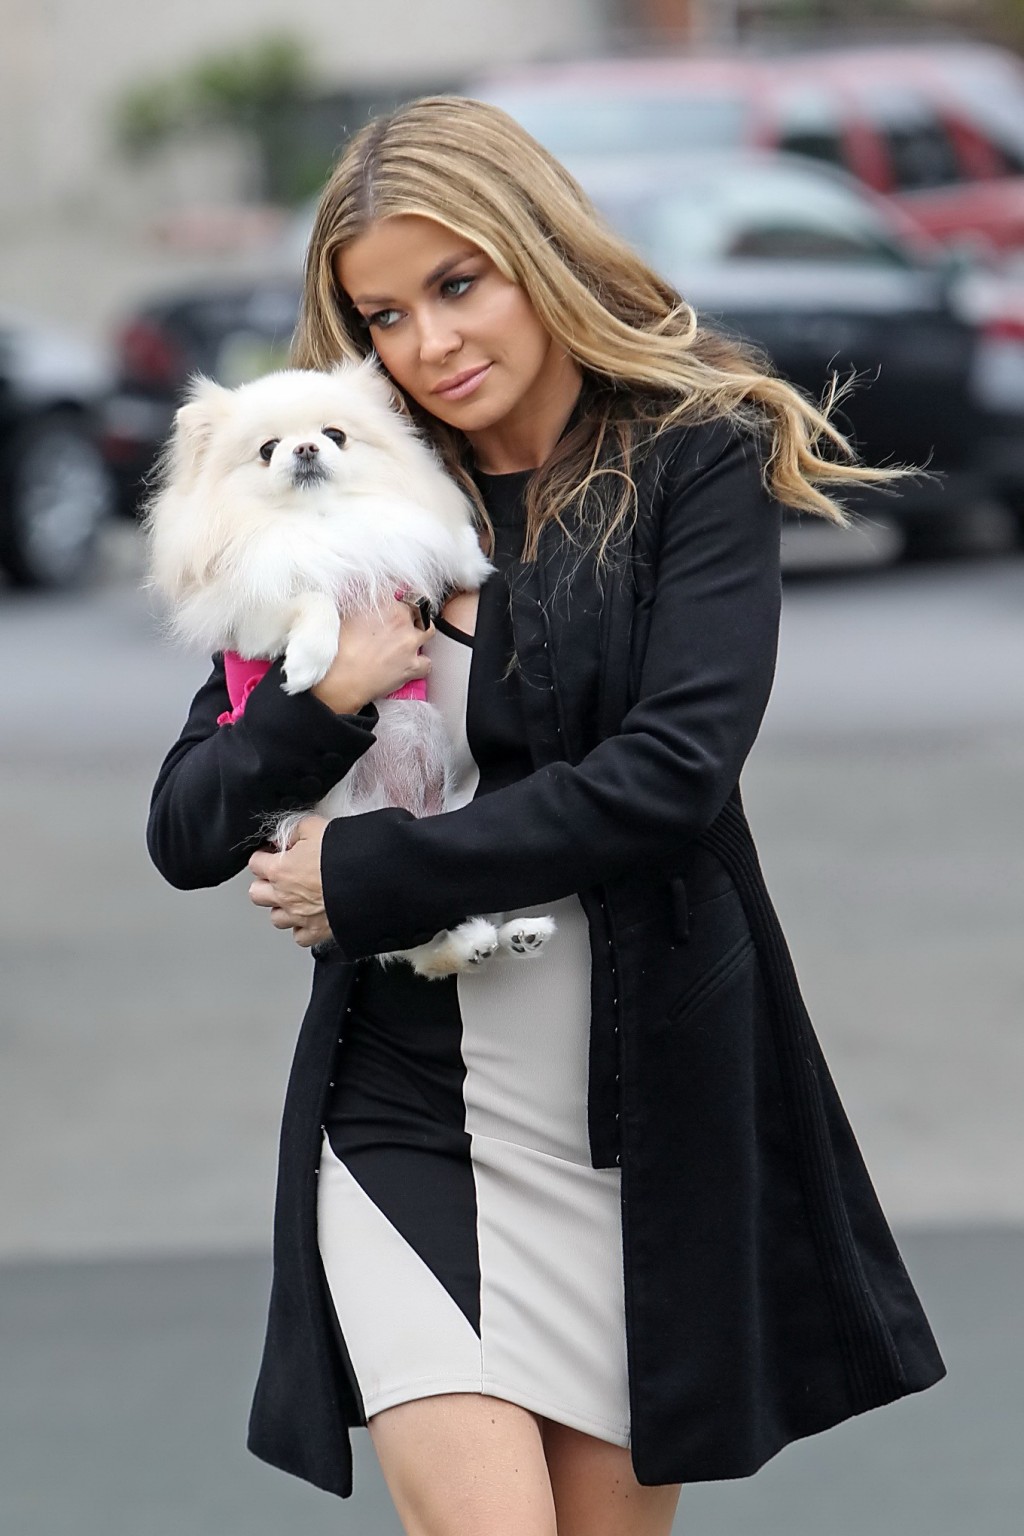 Carmen Electra wearing tight mini dress out with her dog in LA #75236633